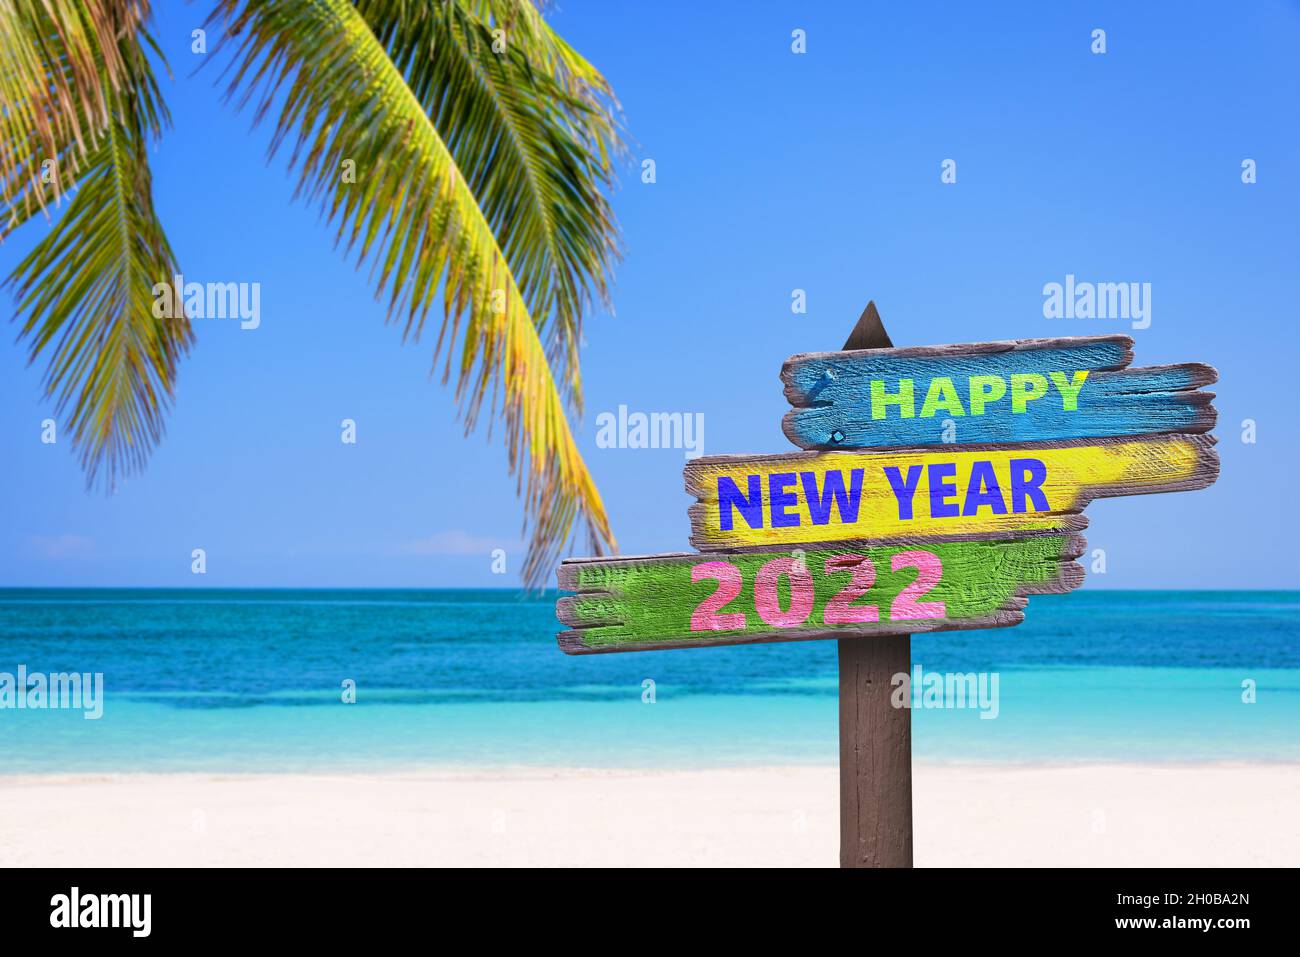 Hapy new year 2022 written on direction signs, tropical beach background, travel and tourism greeting card Stock Photo